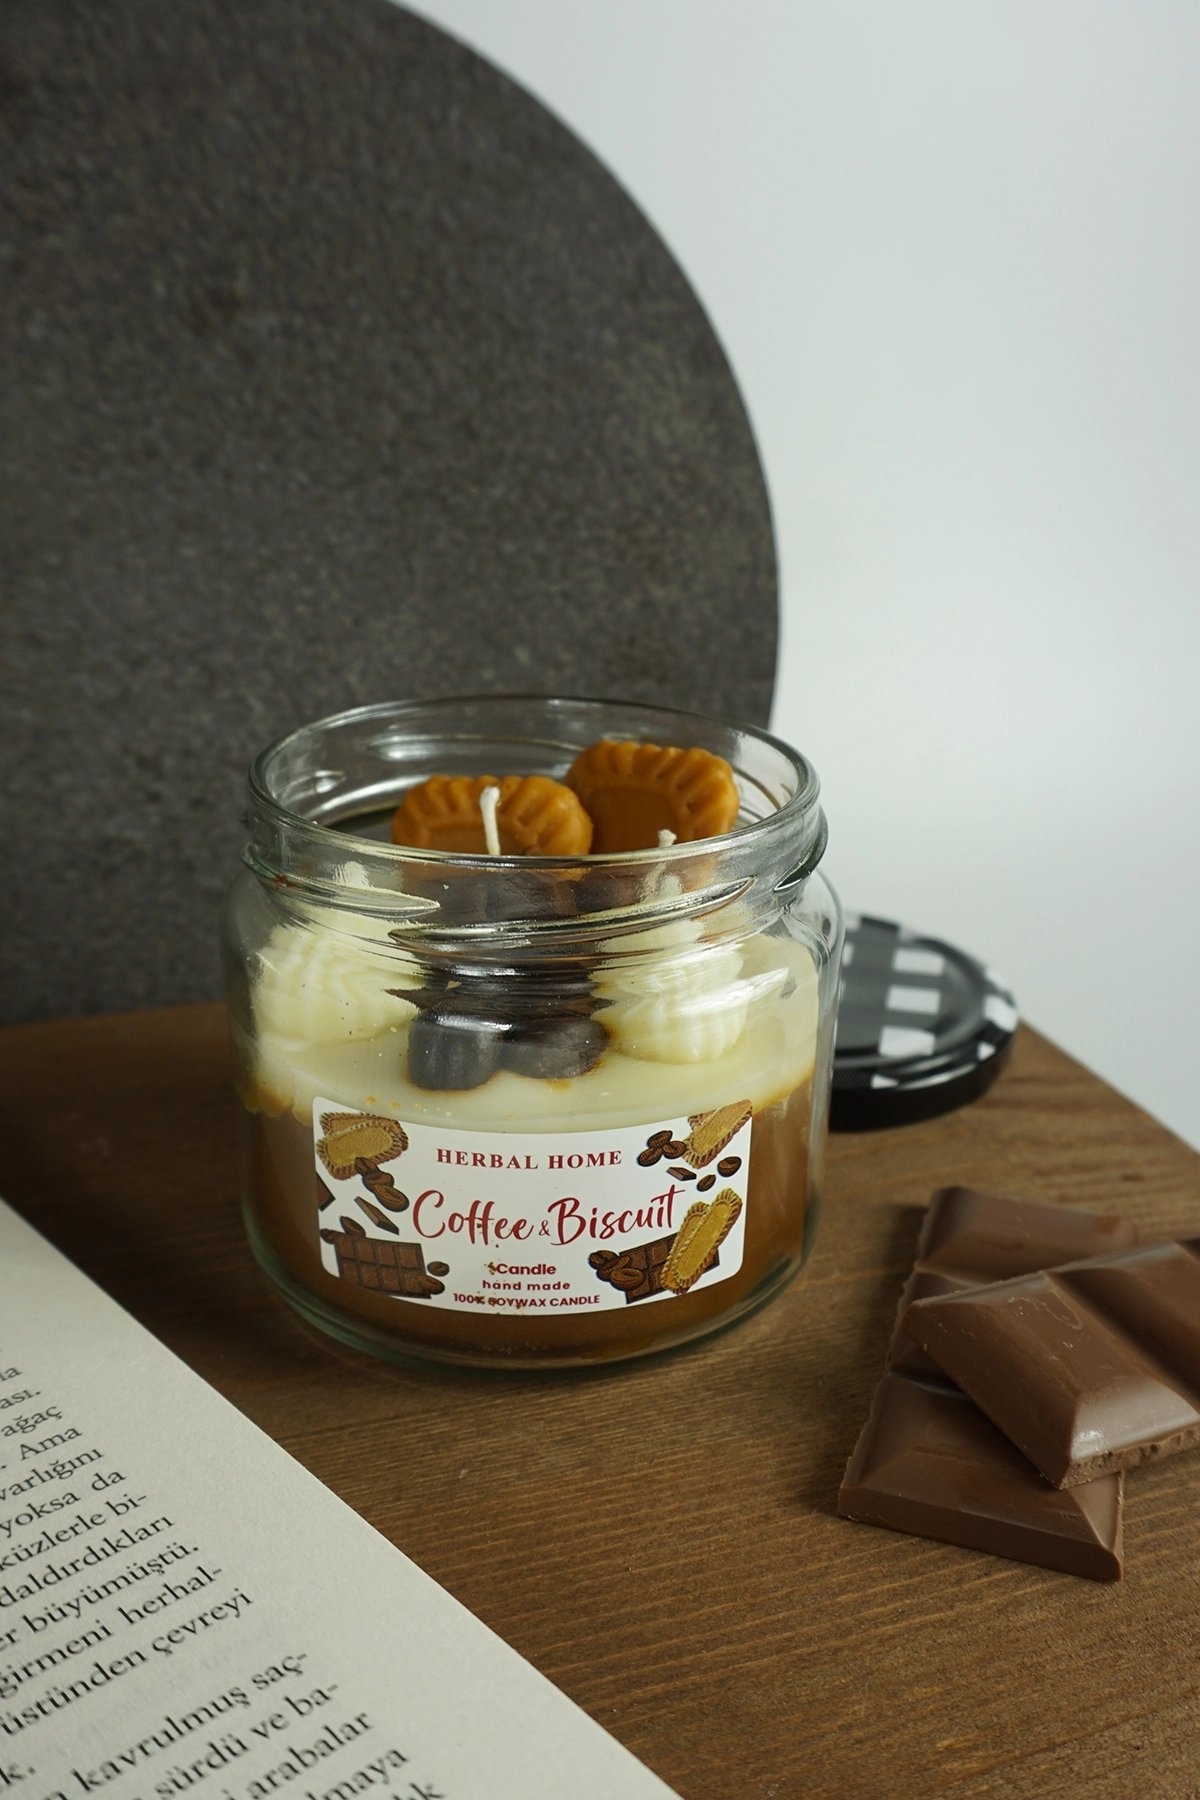 HERBAL HOME Coffee and Biscuit Candle 220 GR - 1